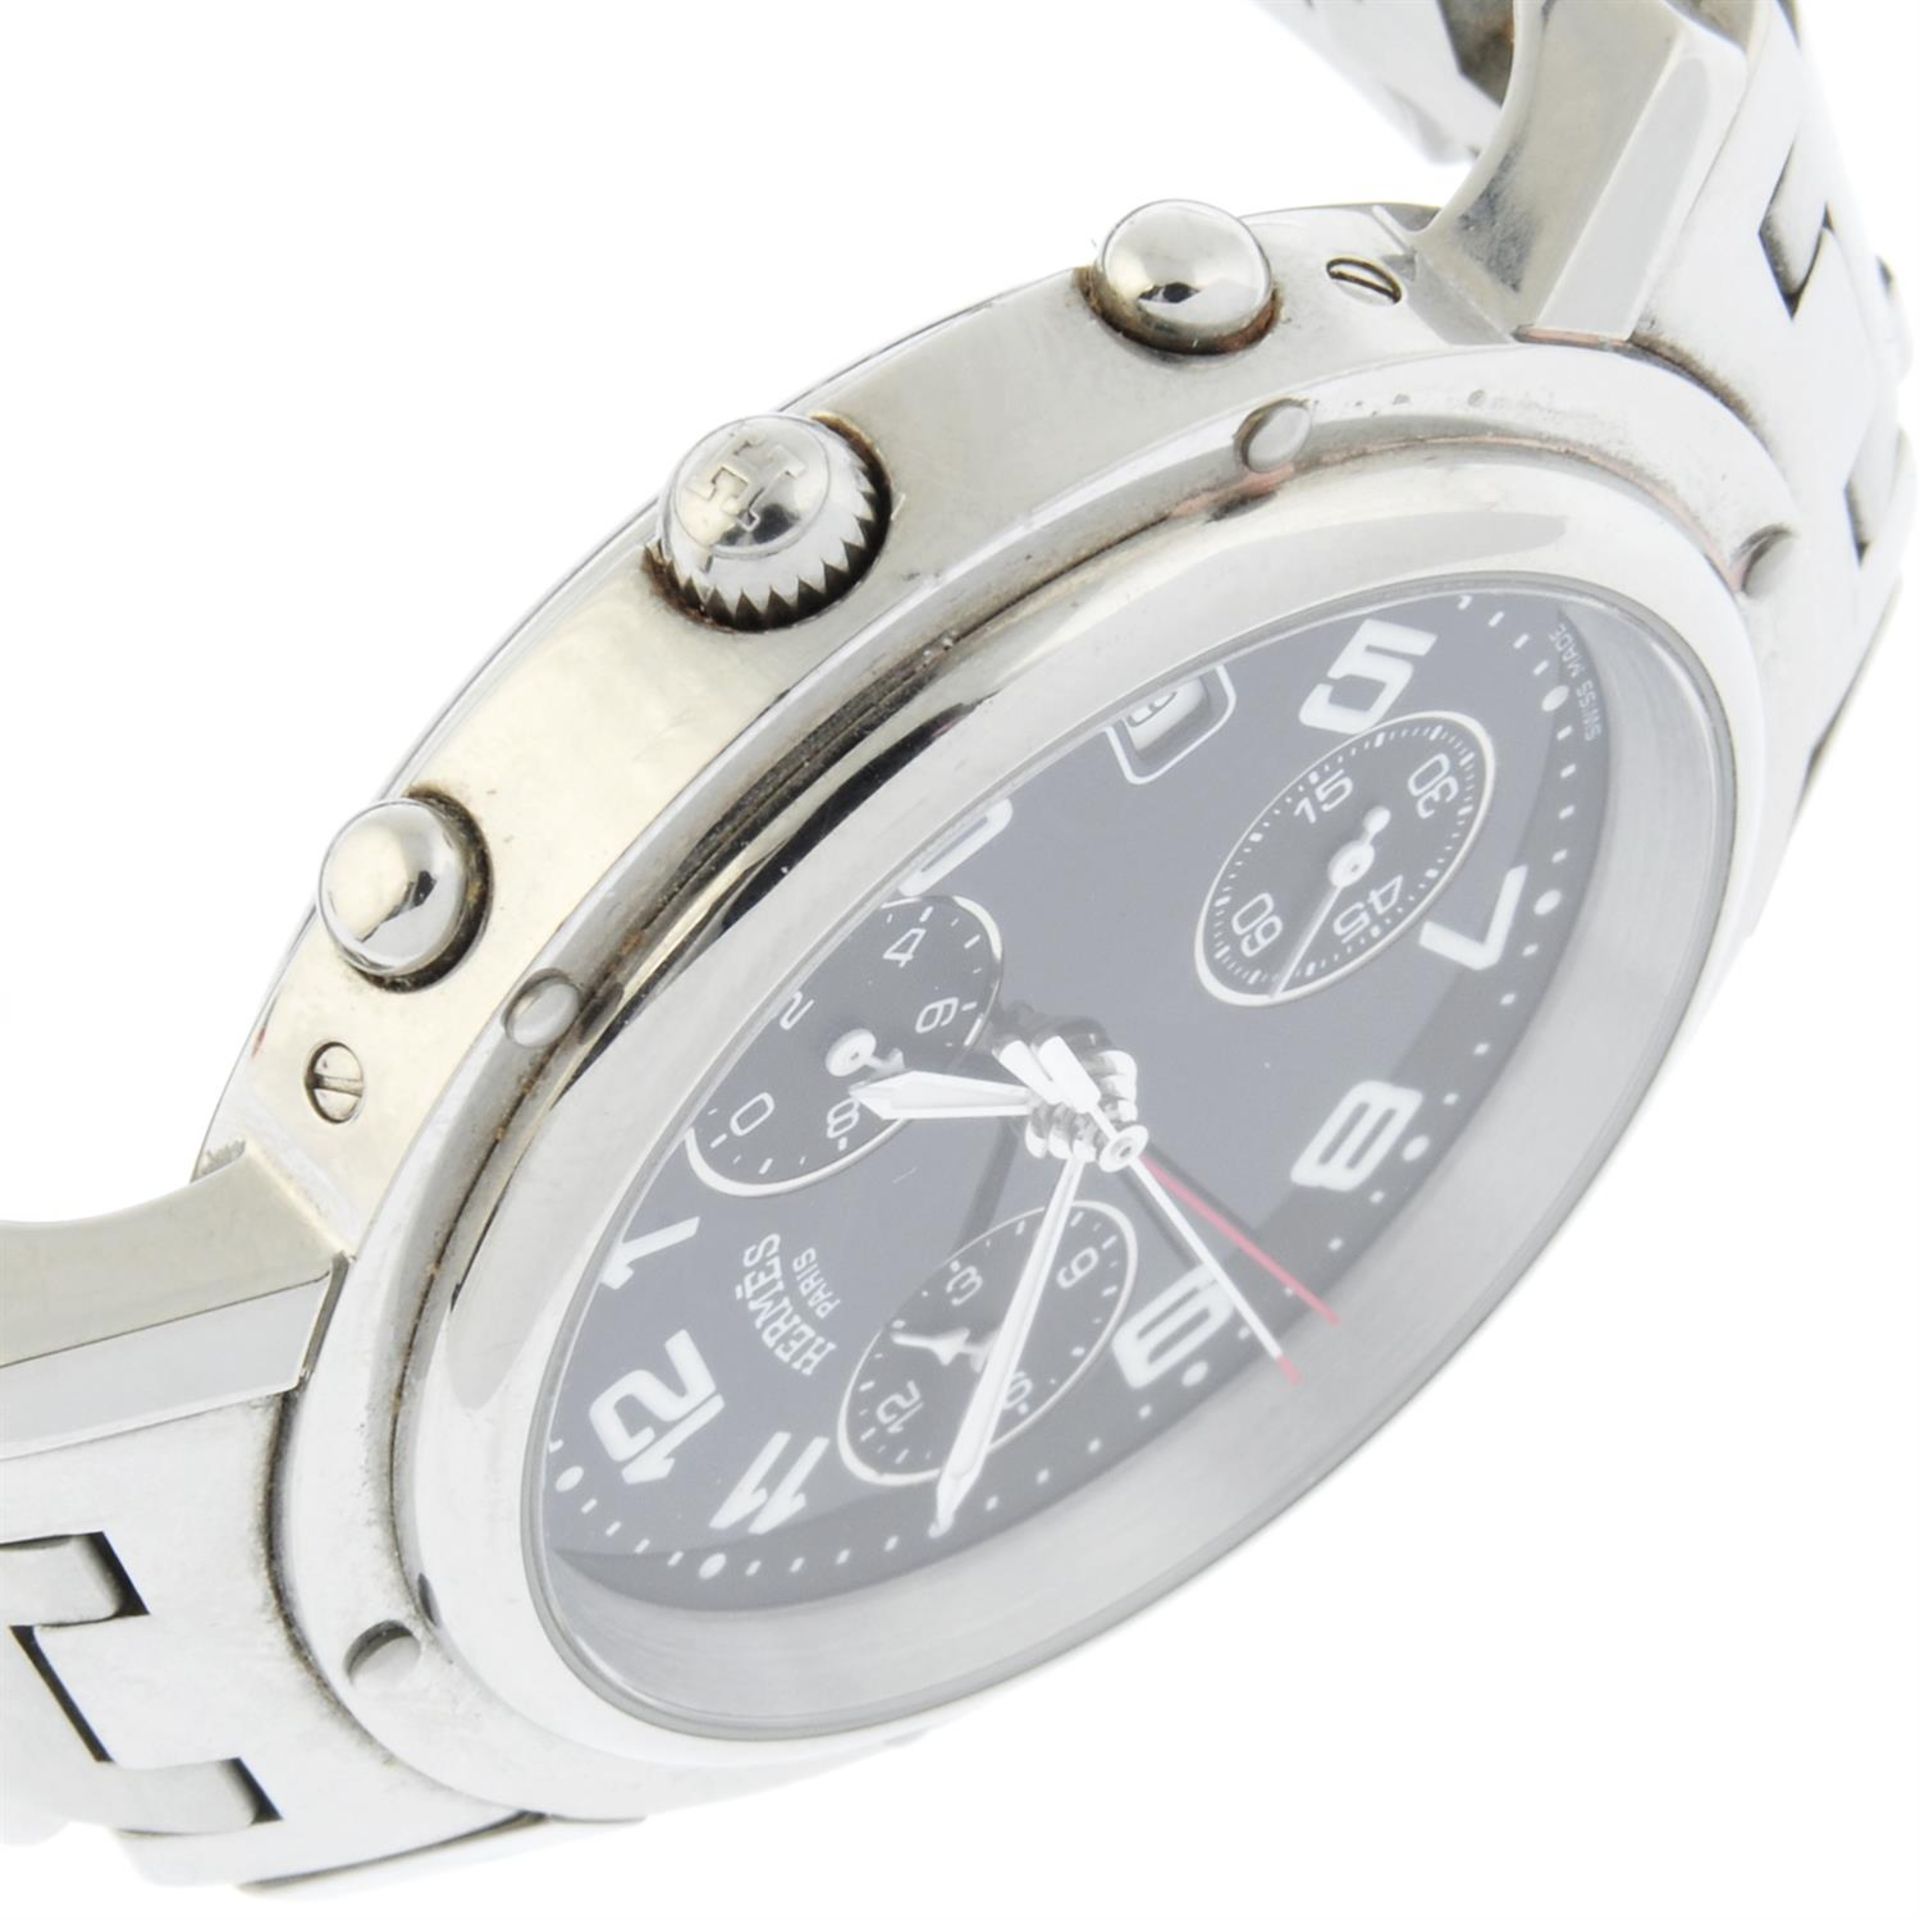 Hermes - a Clipper chronograph watch, 38mm. - Image 3 of 5